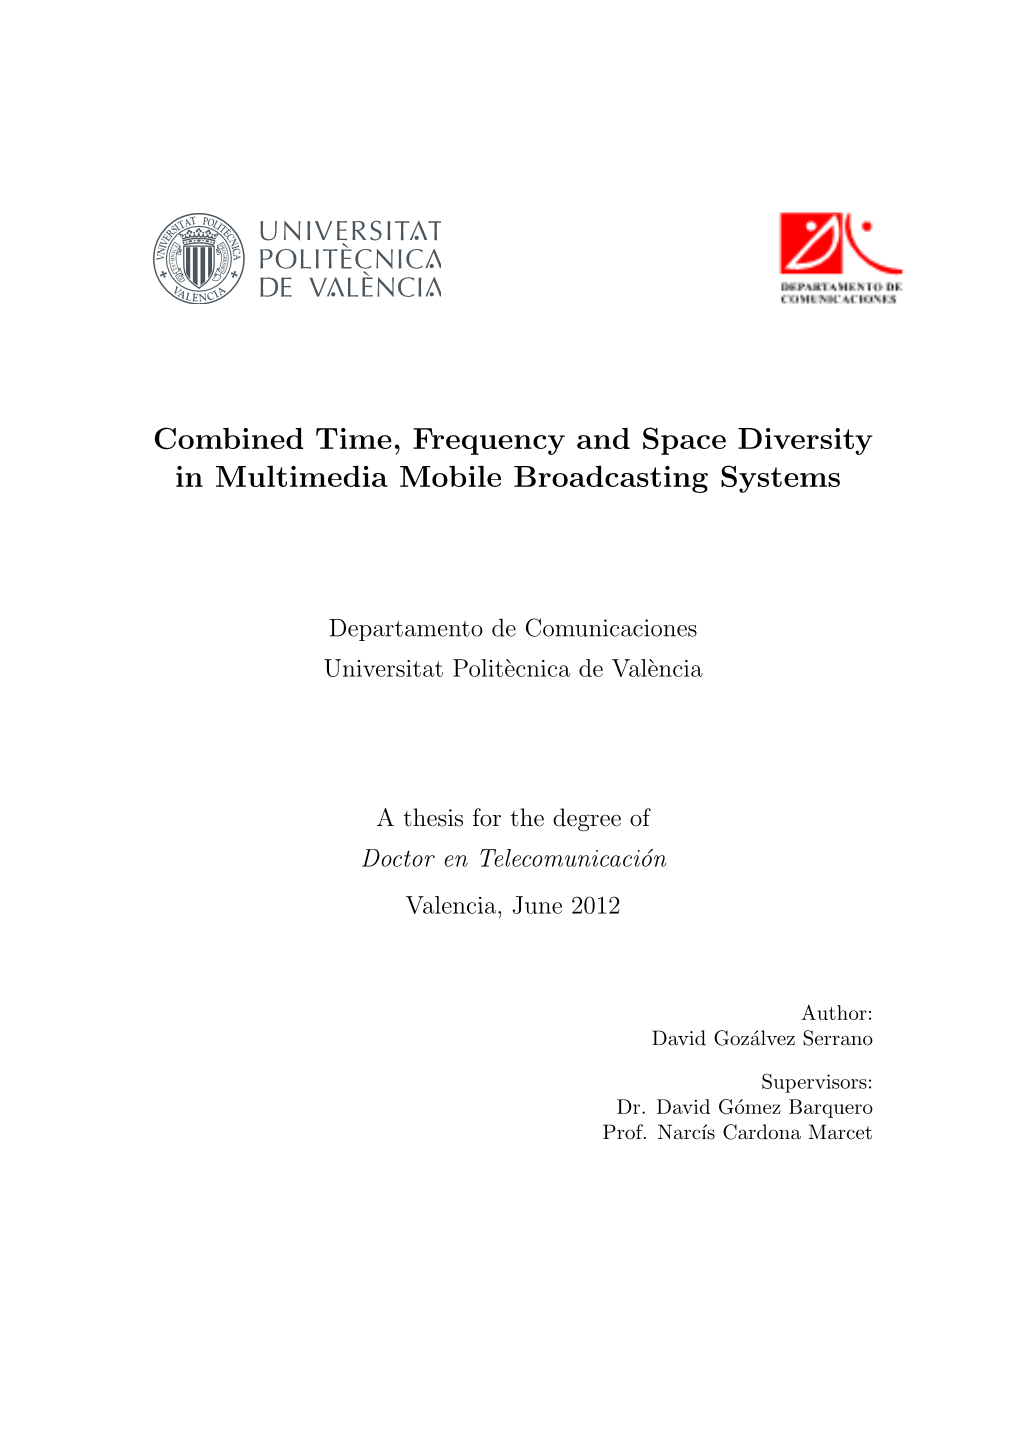 Combined Time, Frequency and Space Diversity in Multimedia Mobile Broadcasting Systems